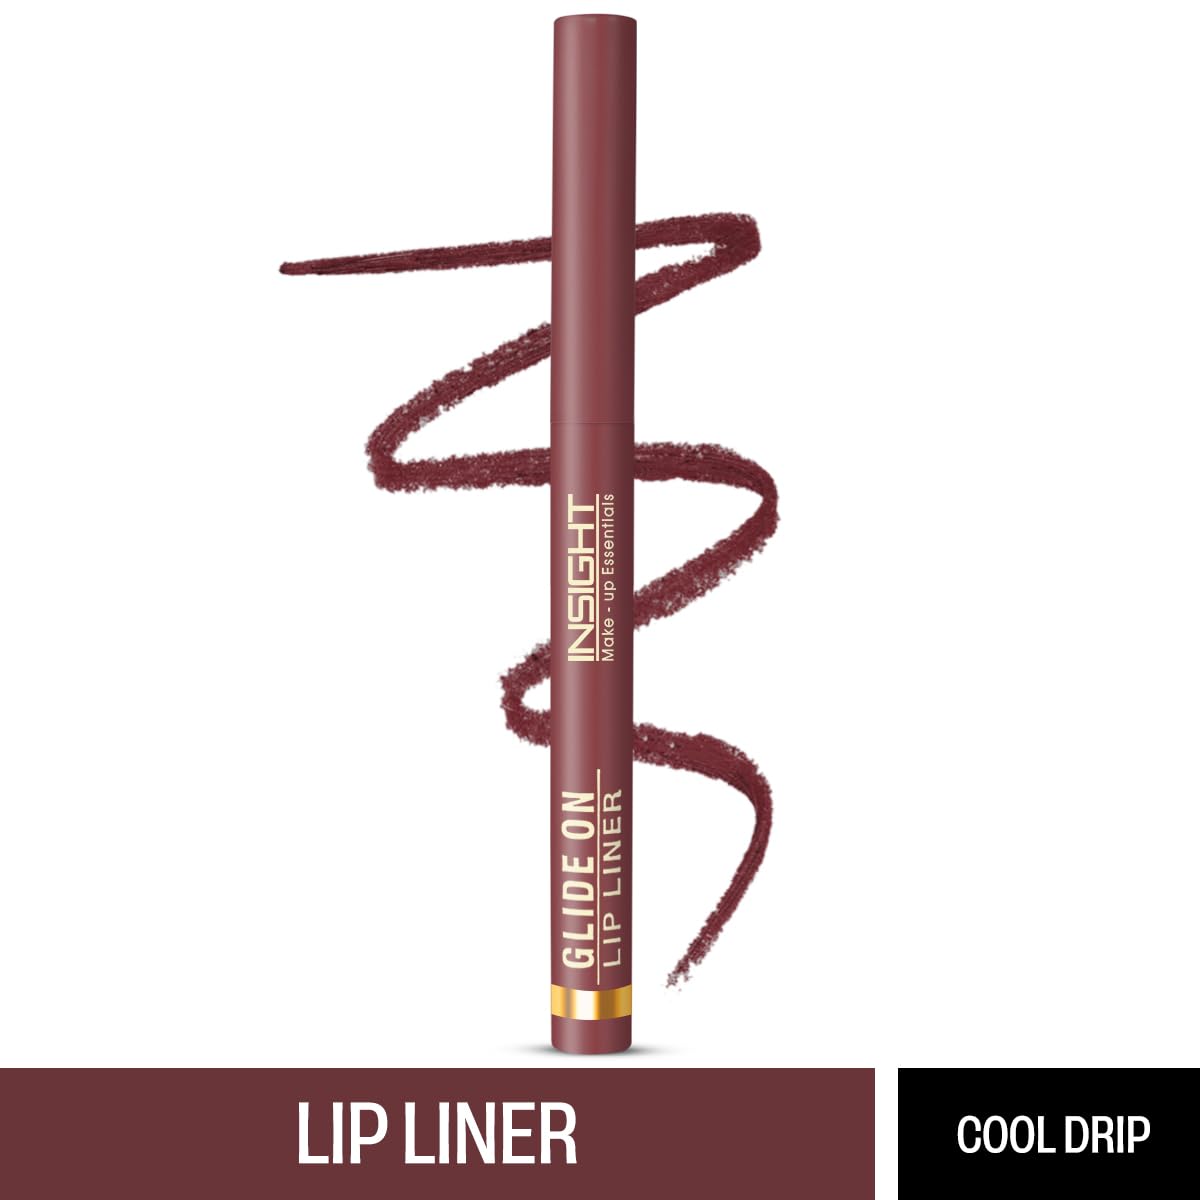 Insight Cosmetics Glide On Lip Liner | One Swipe Smooth Application | Long Lasting Lip Pencil,0.3 gm,18